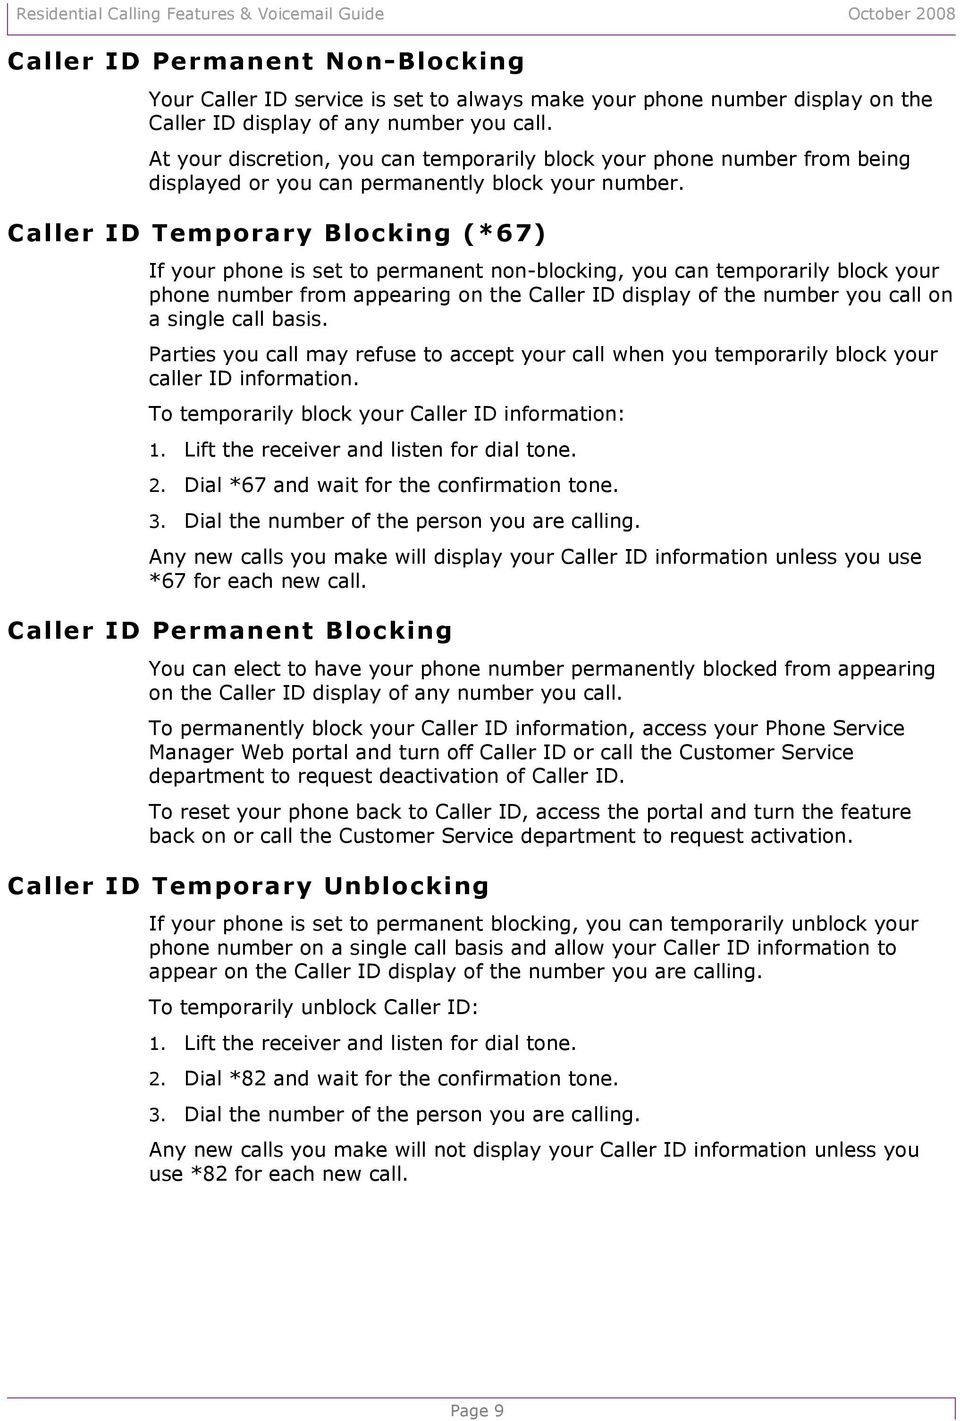 Caller ID Temporary Blocking (*67) If your phone is set to permanent non-blocking, you can temporarily block your phone number from appearing on the Caller ID display of the number you call on a